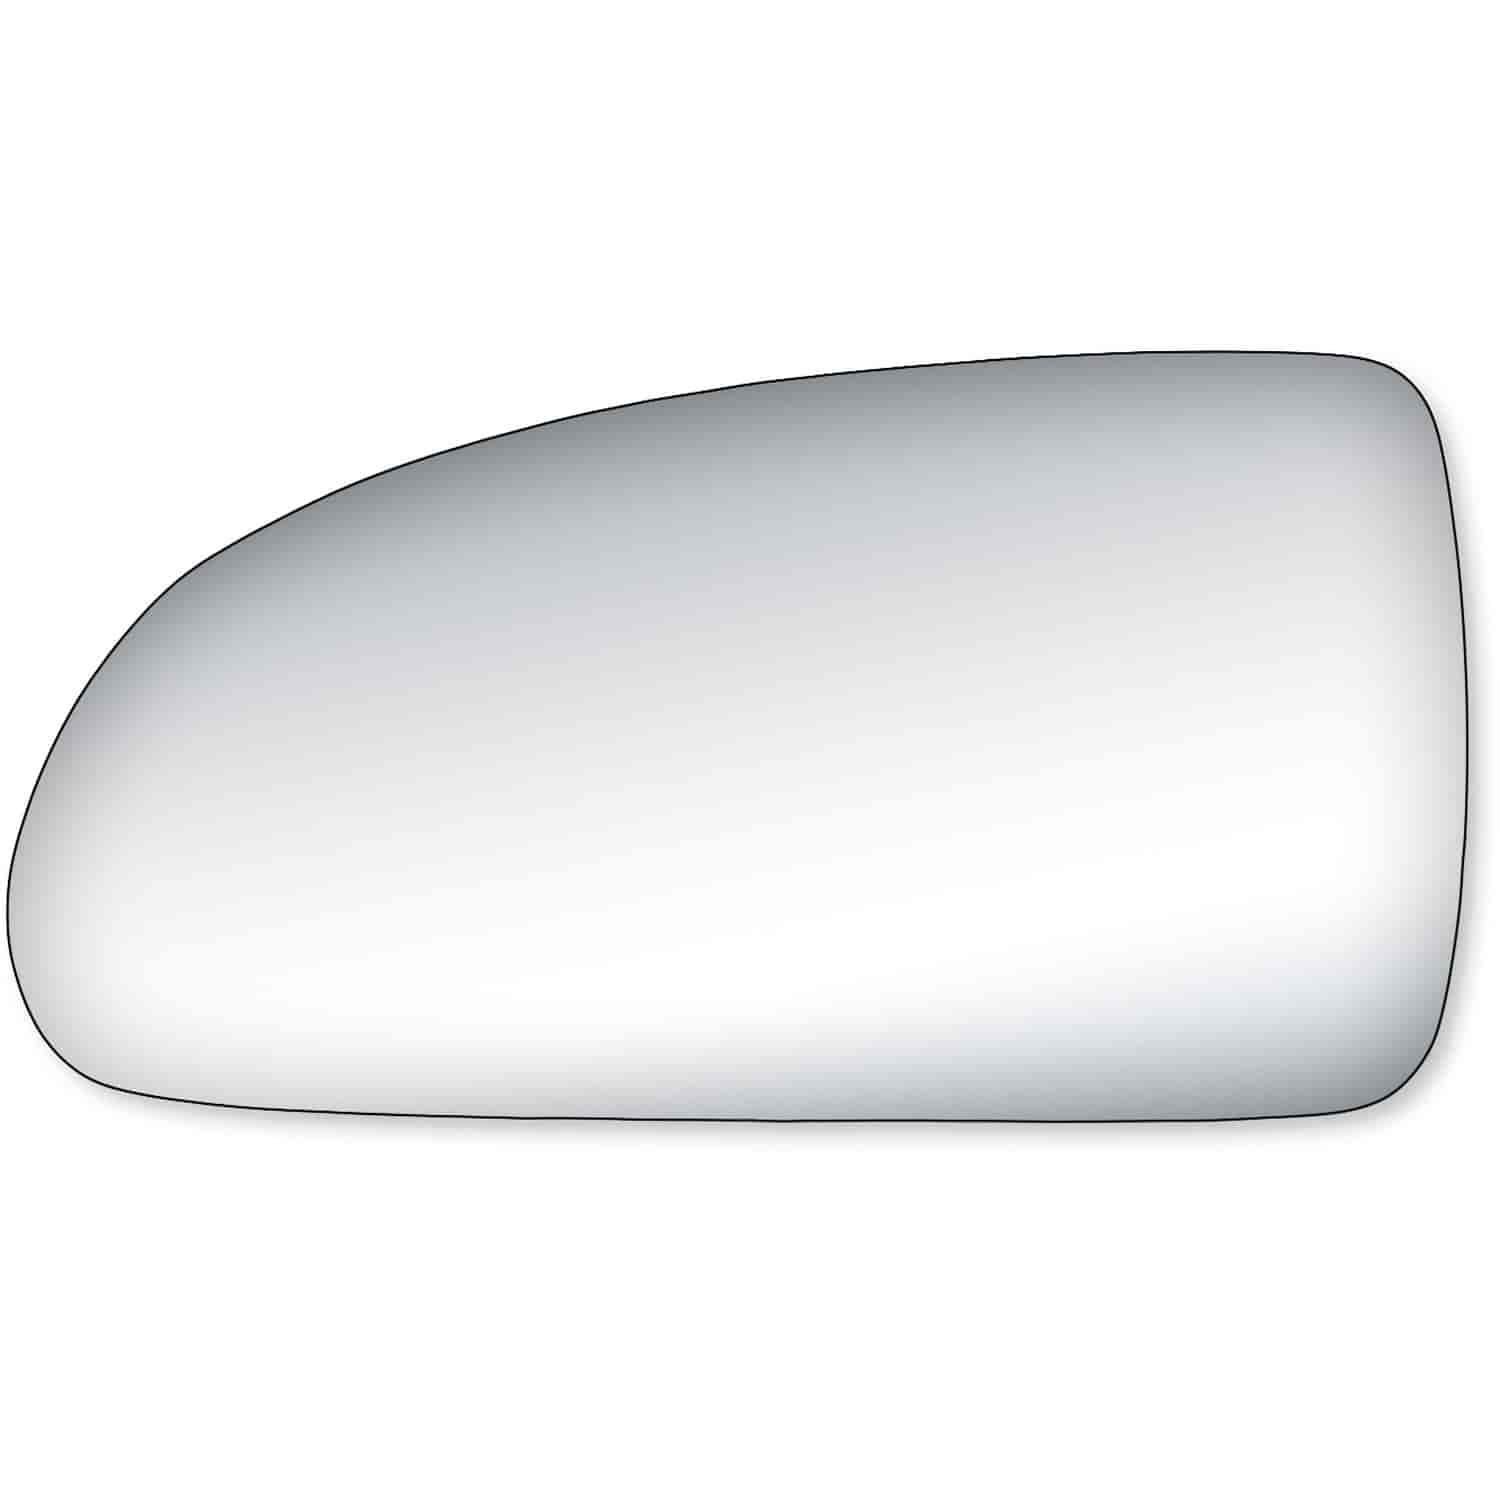 Replacement Glass for 07-10 Elantra Sedan the glass